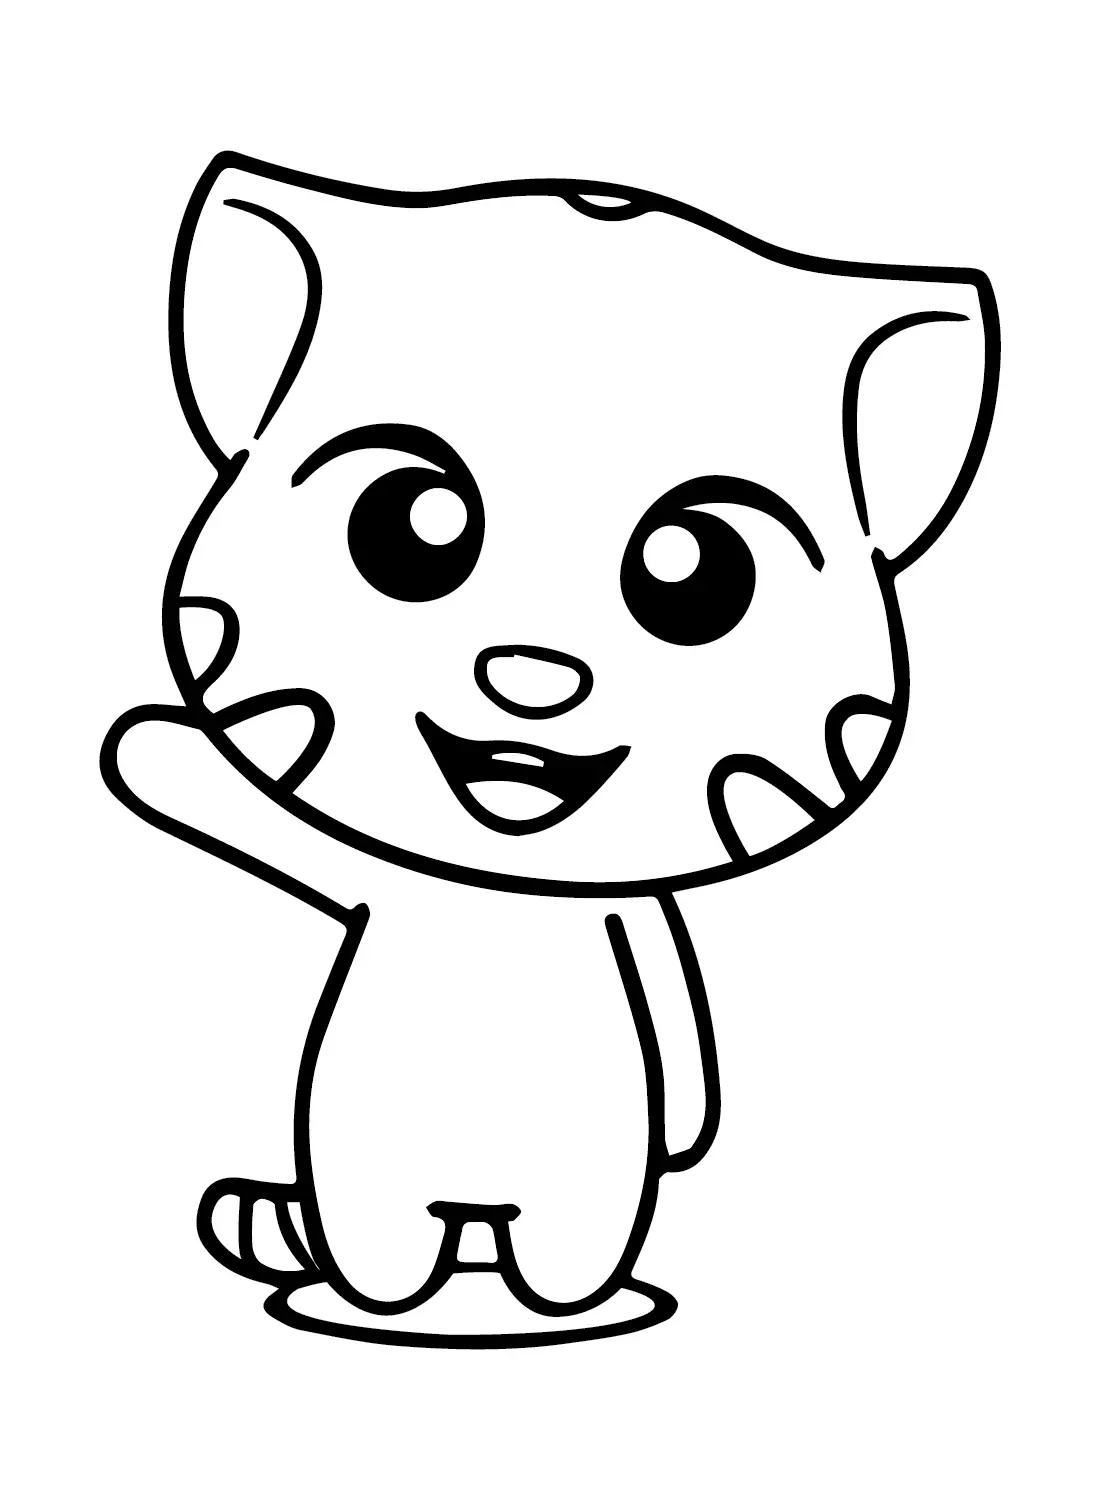 Talking Tom Coloring Pages